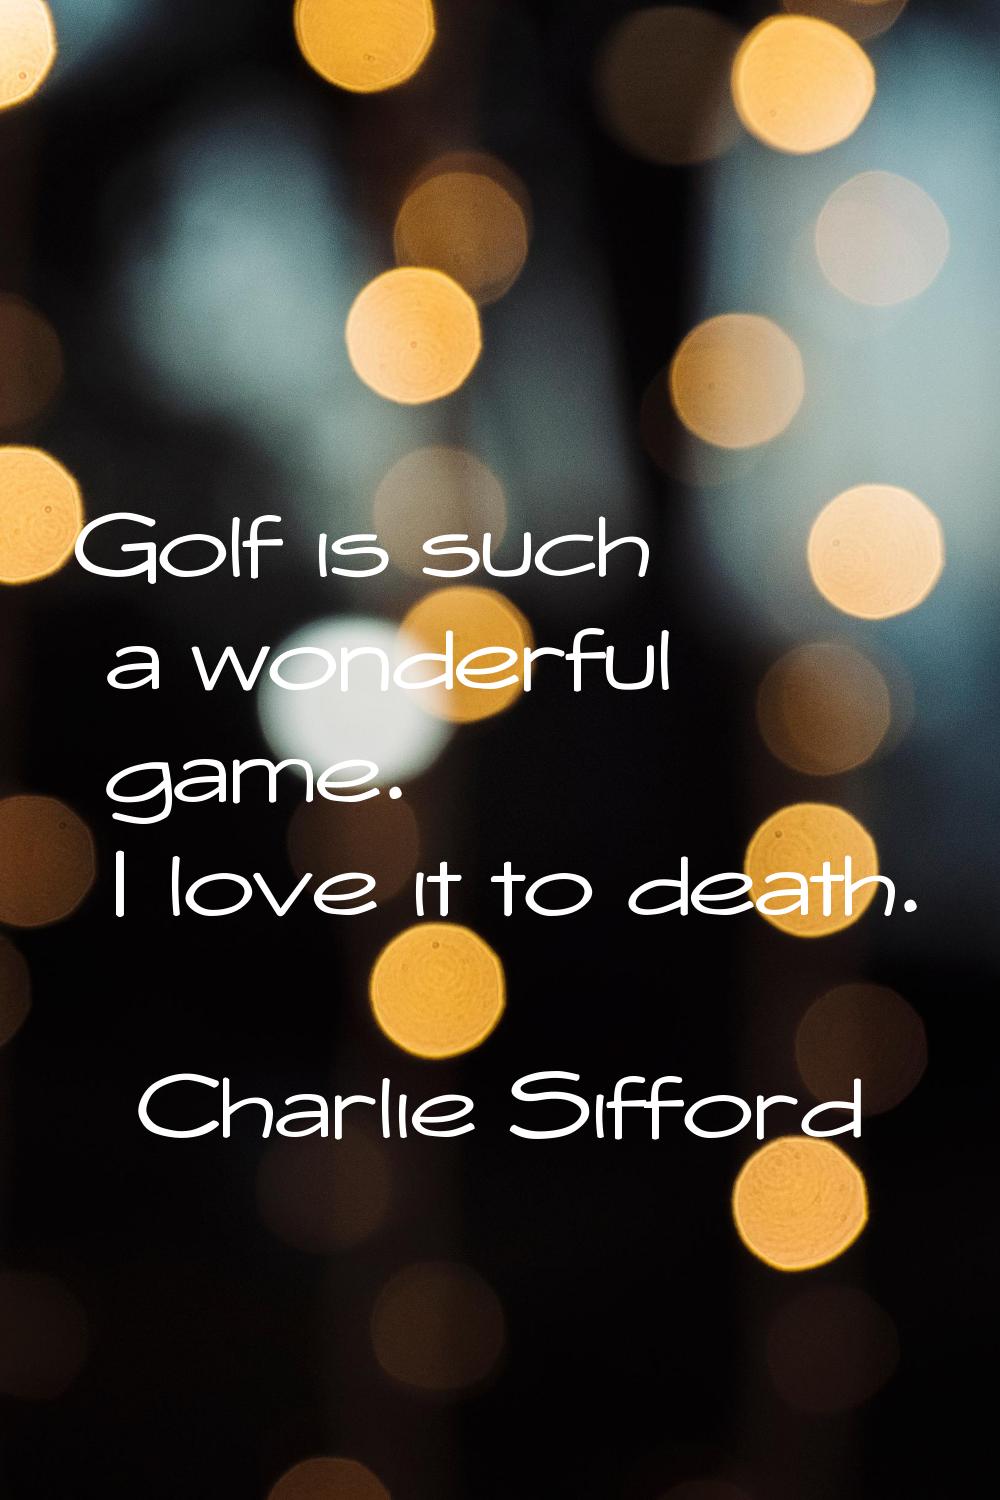 Golf is such a wonderful game. I love it to death.